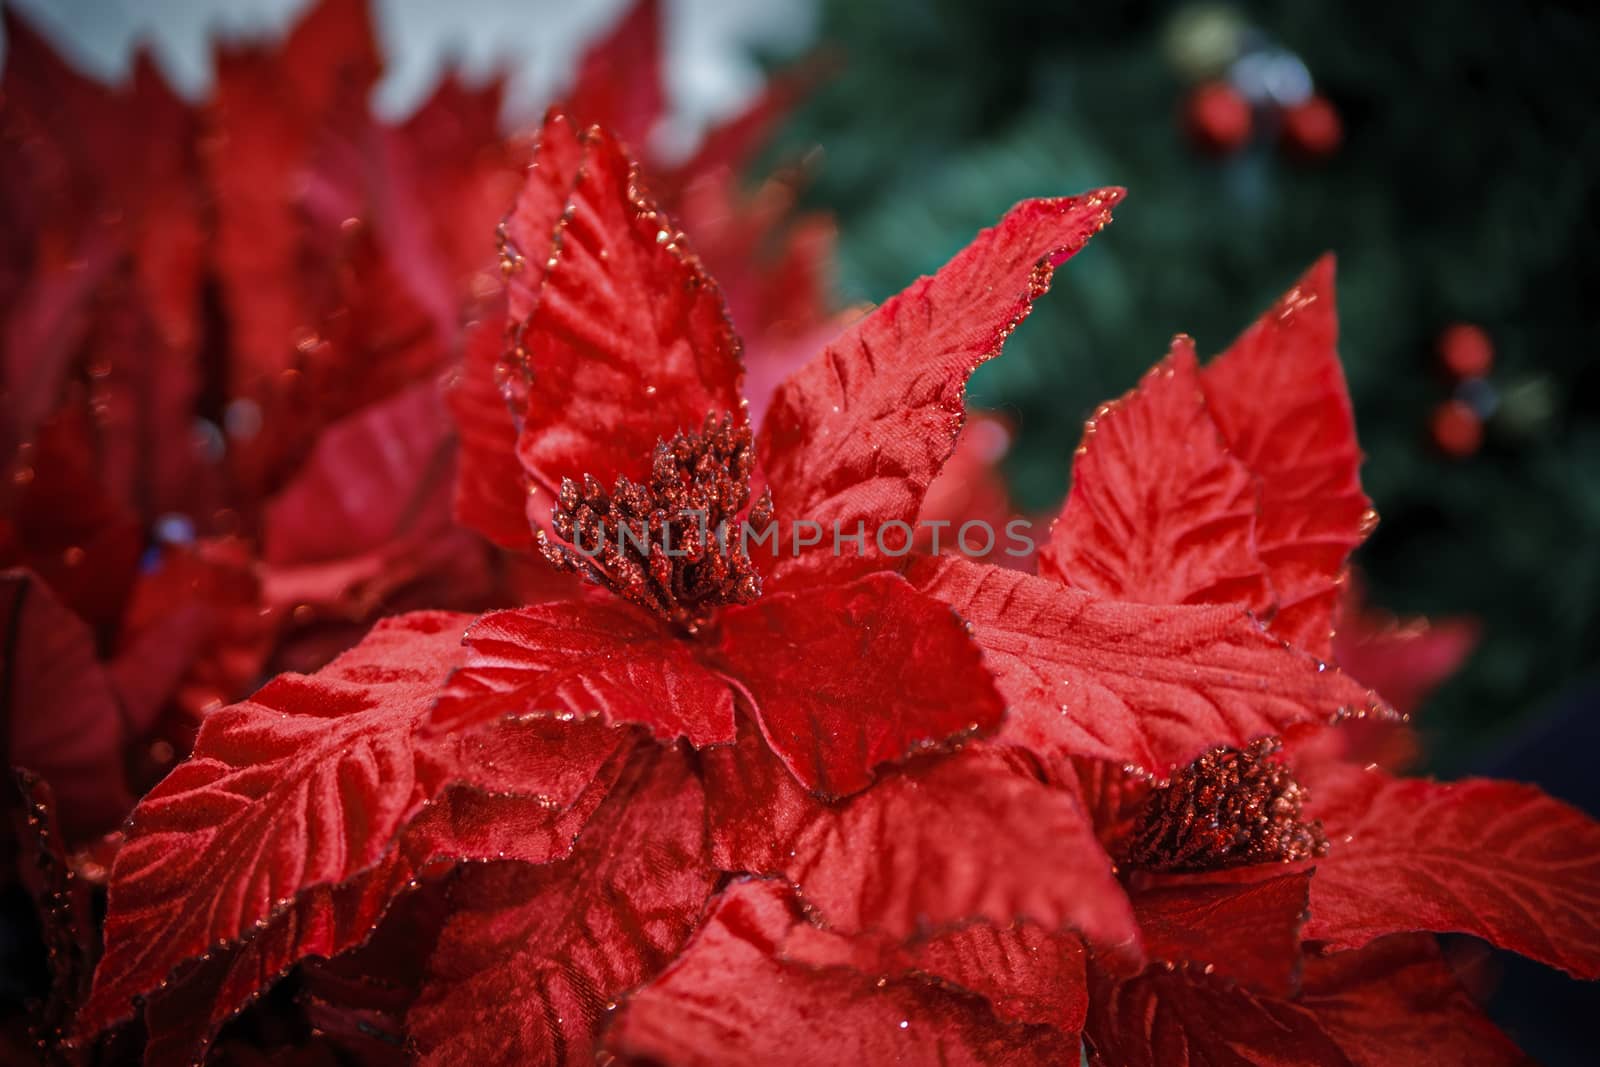 Christmas decoration on abstract background. The red leaves of a poinsettia is a traditional Christmas decoration.